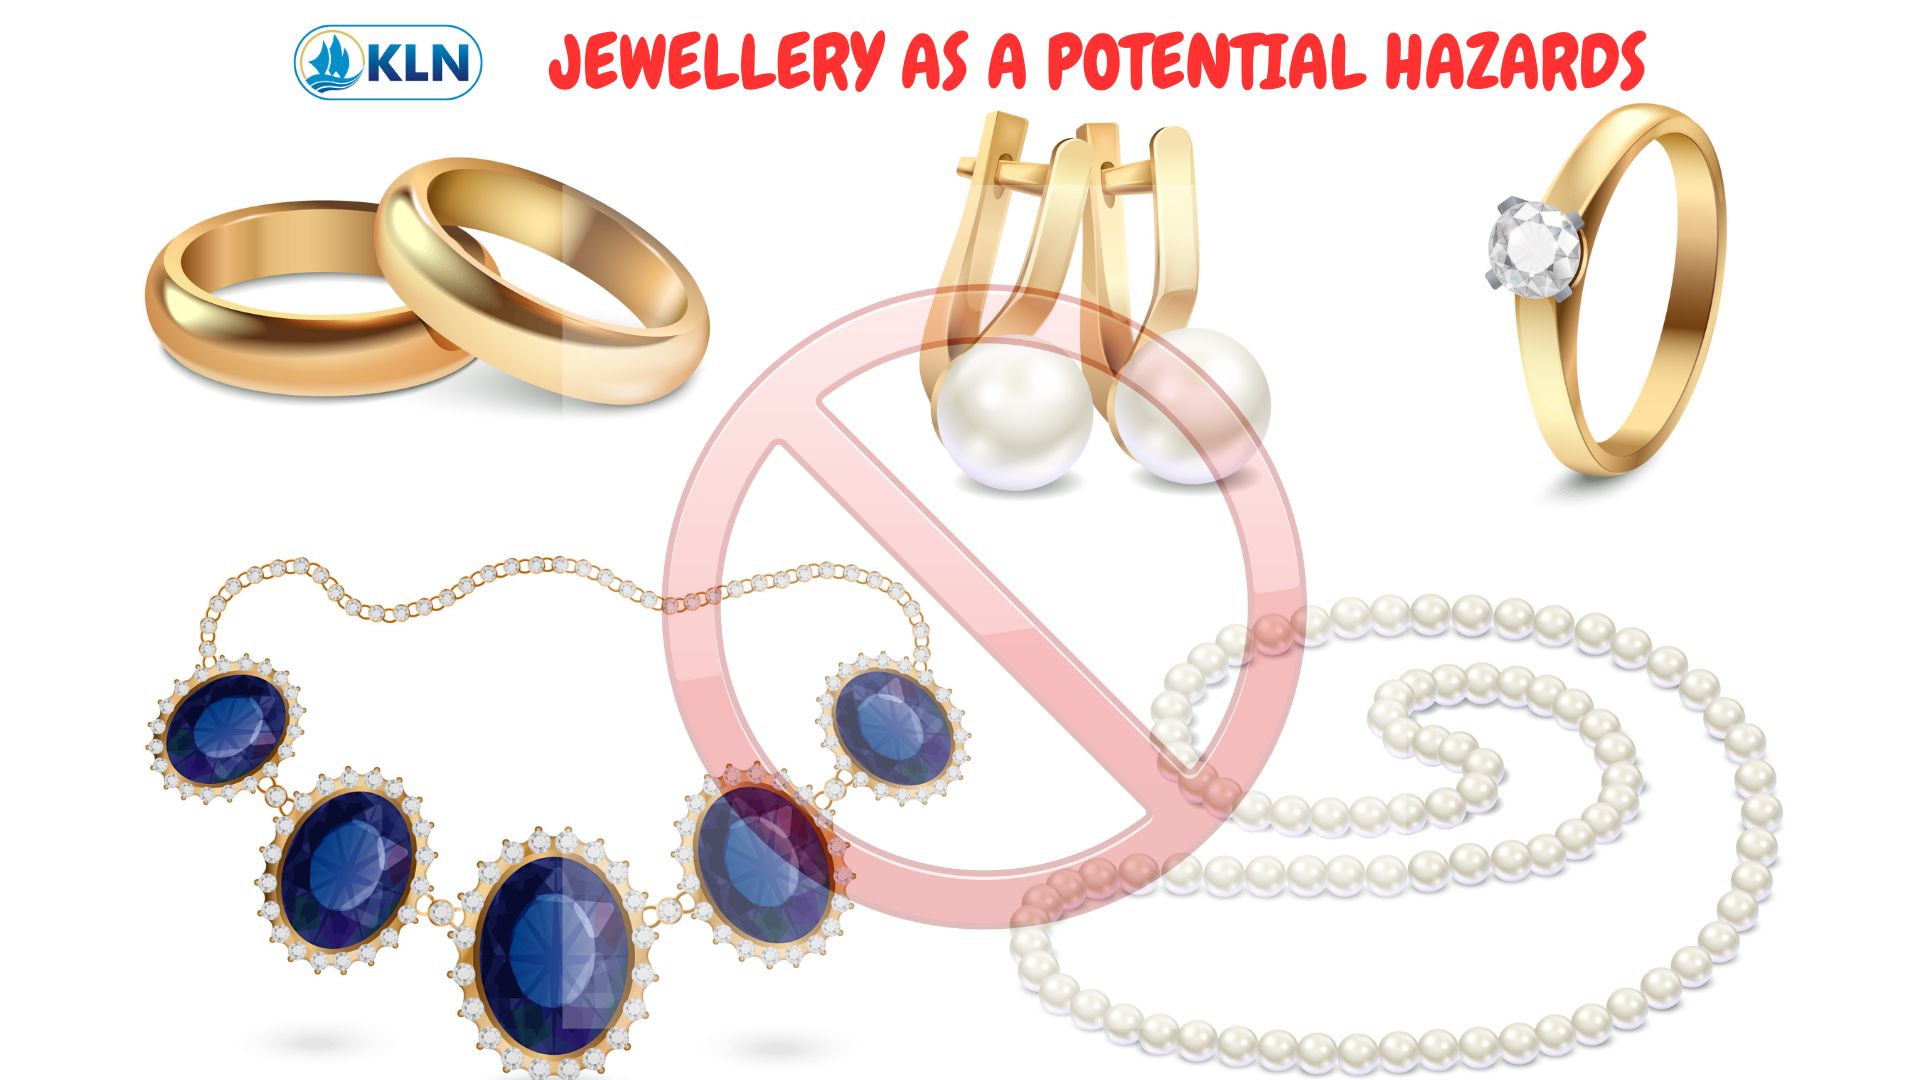 JEWELLERY AS A POTENTIAL HAZARDS